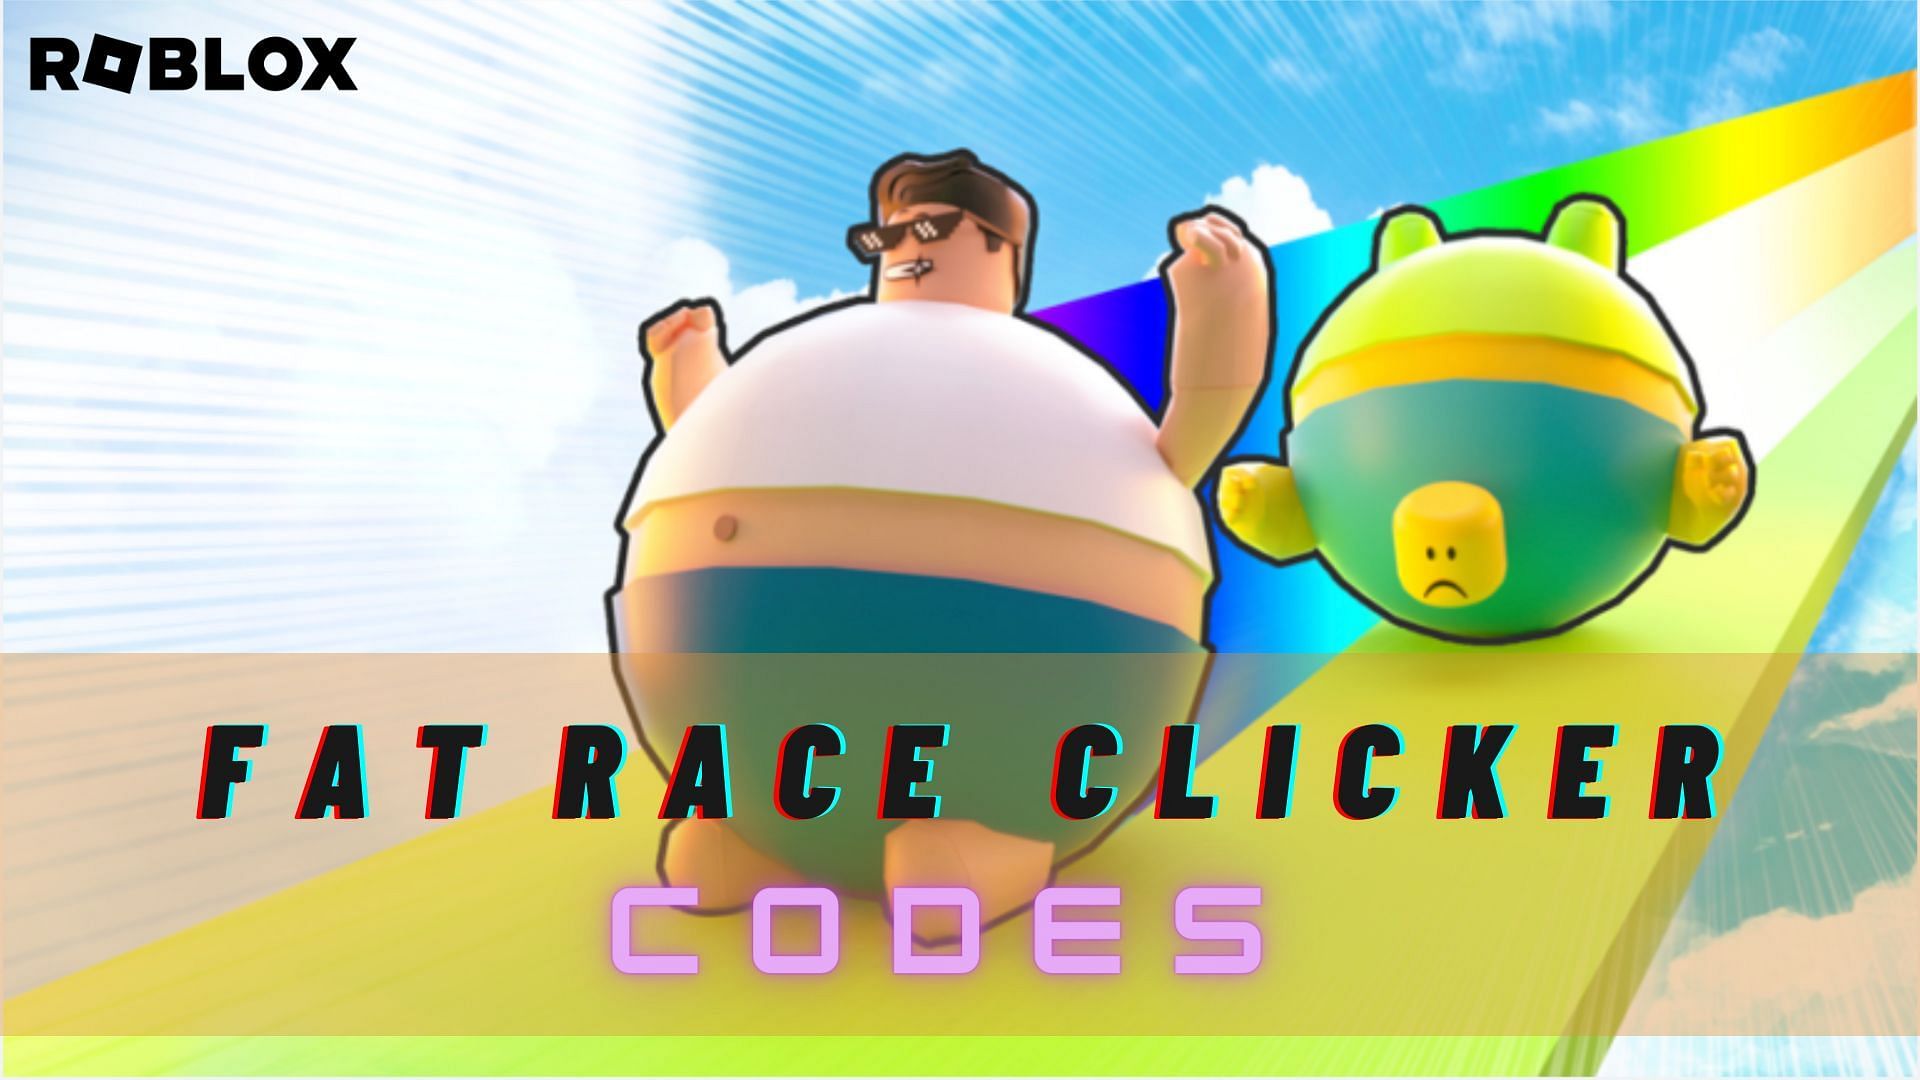 Roblox Fat Race Clicker Codes (February 2023) - Free Food Potions and more